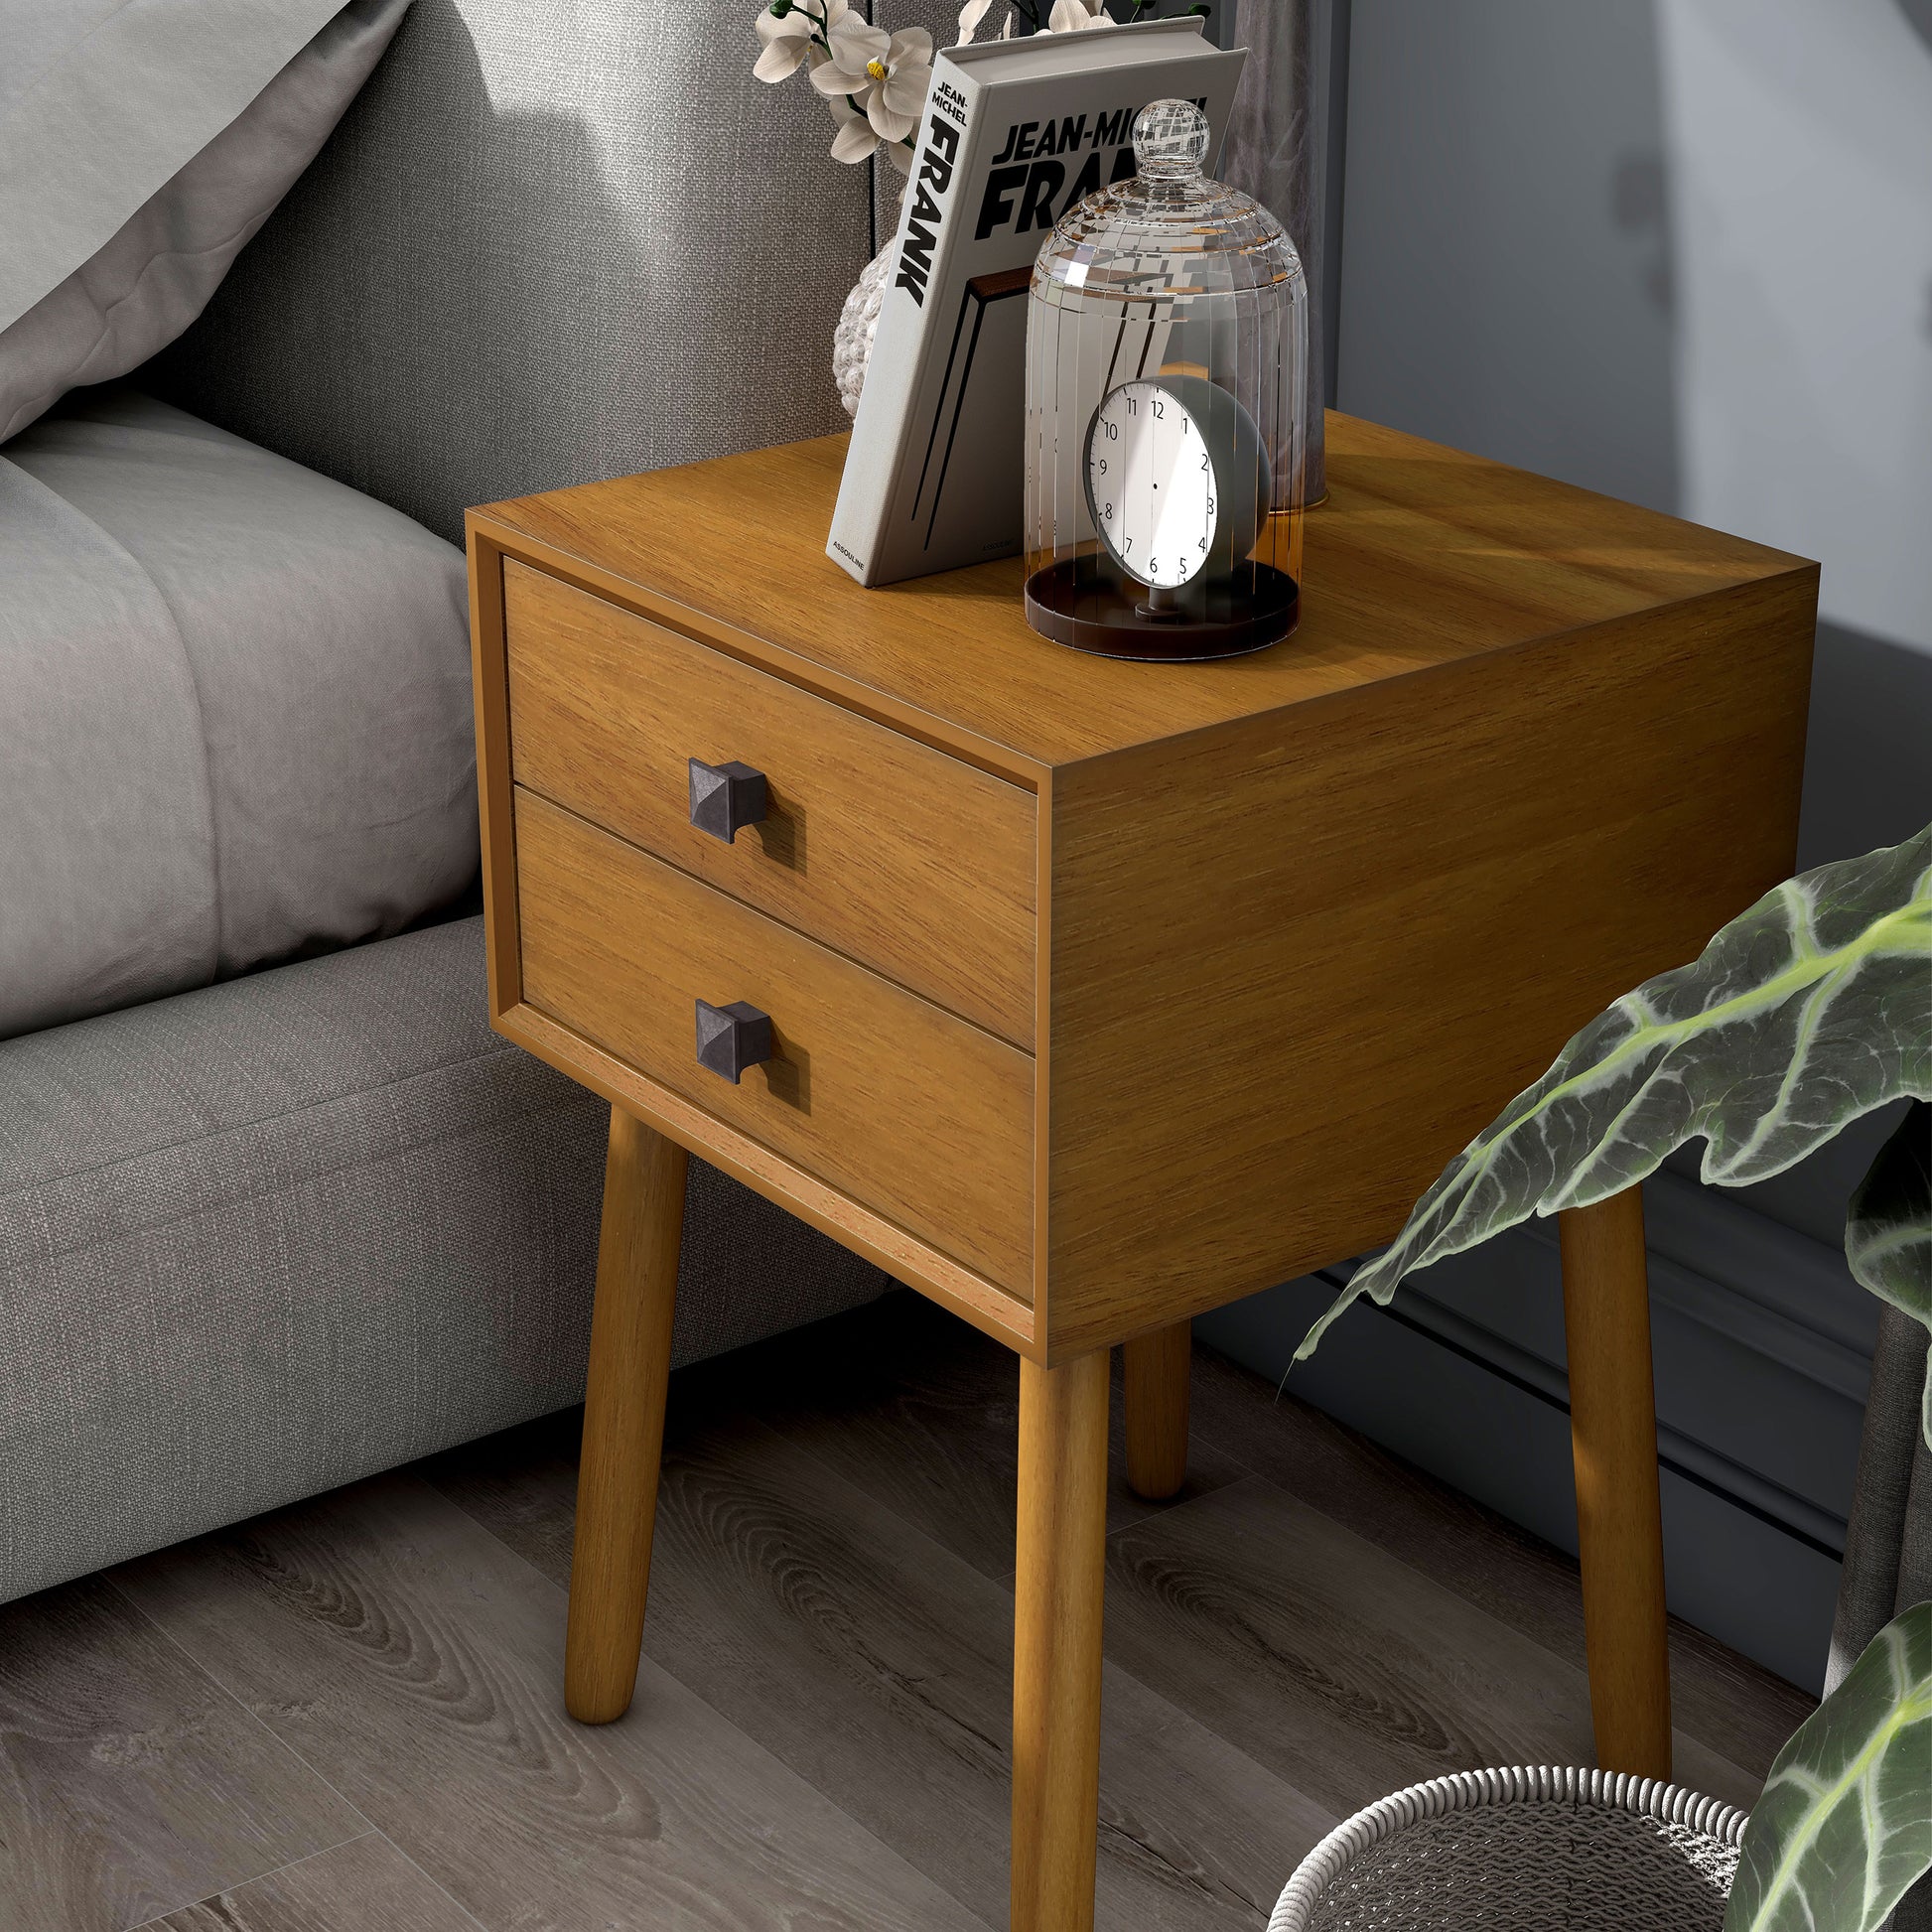 Left angled modern light oak two-drawer compact nightstand with splayed legs in a bedroom with accessories